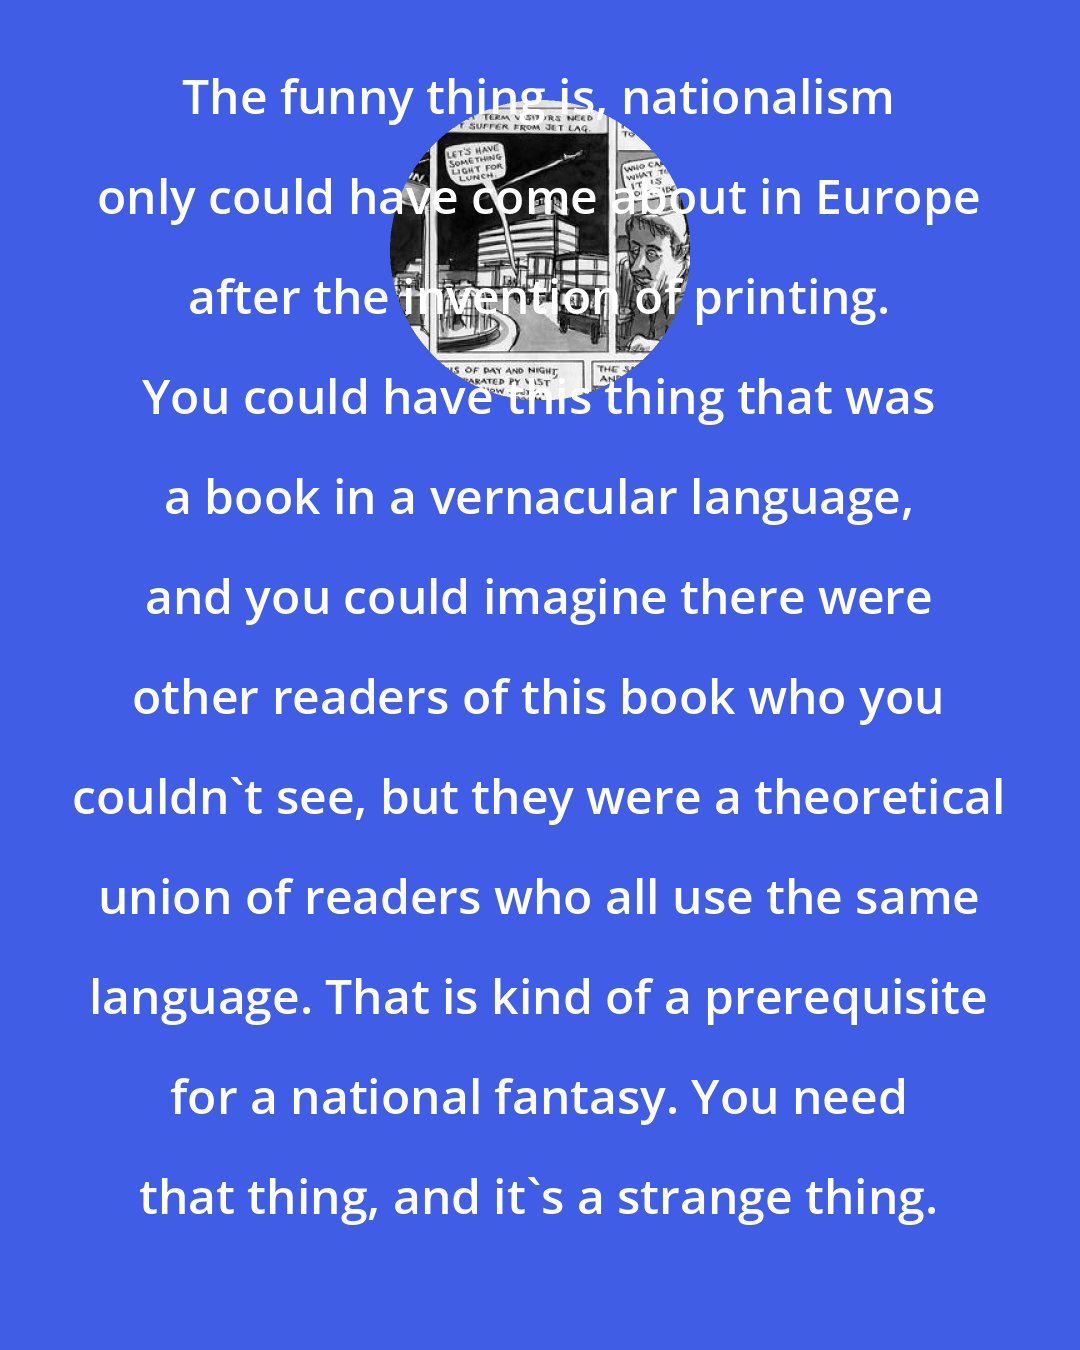 Ben Katchor: The funny thing is, nationalism only could have come about in Europe after the invention of printing. You could have this thing that was a book in a vernacular language, and you could imagine there were other readers of this book who you couldn't see, but they were a theoretical union of readers who all use the same language. That is kind of a prerequisite for a national fantasy. You need that thing, and it's a strange thing.